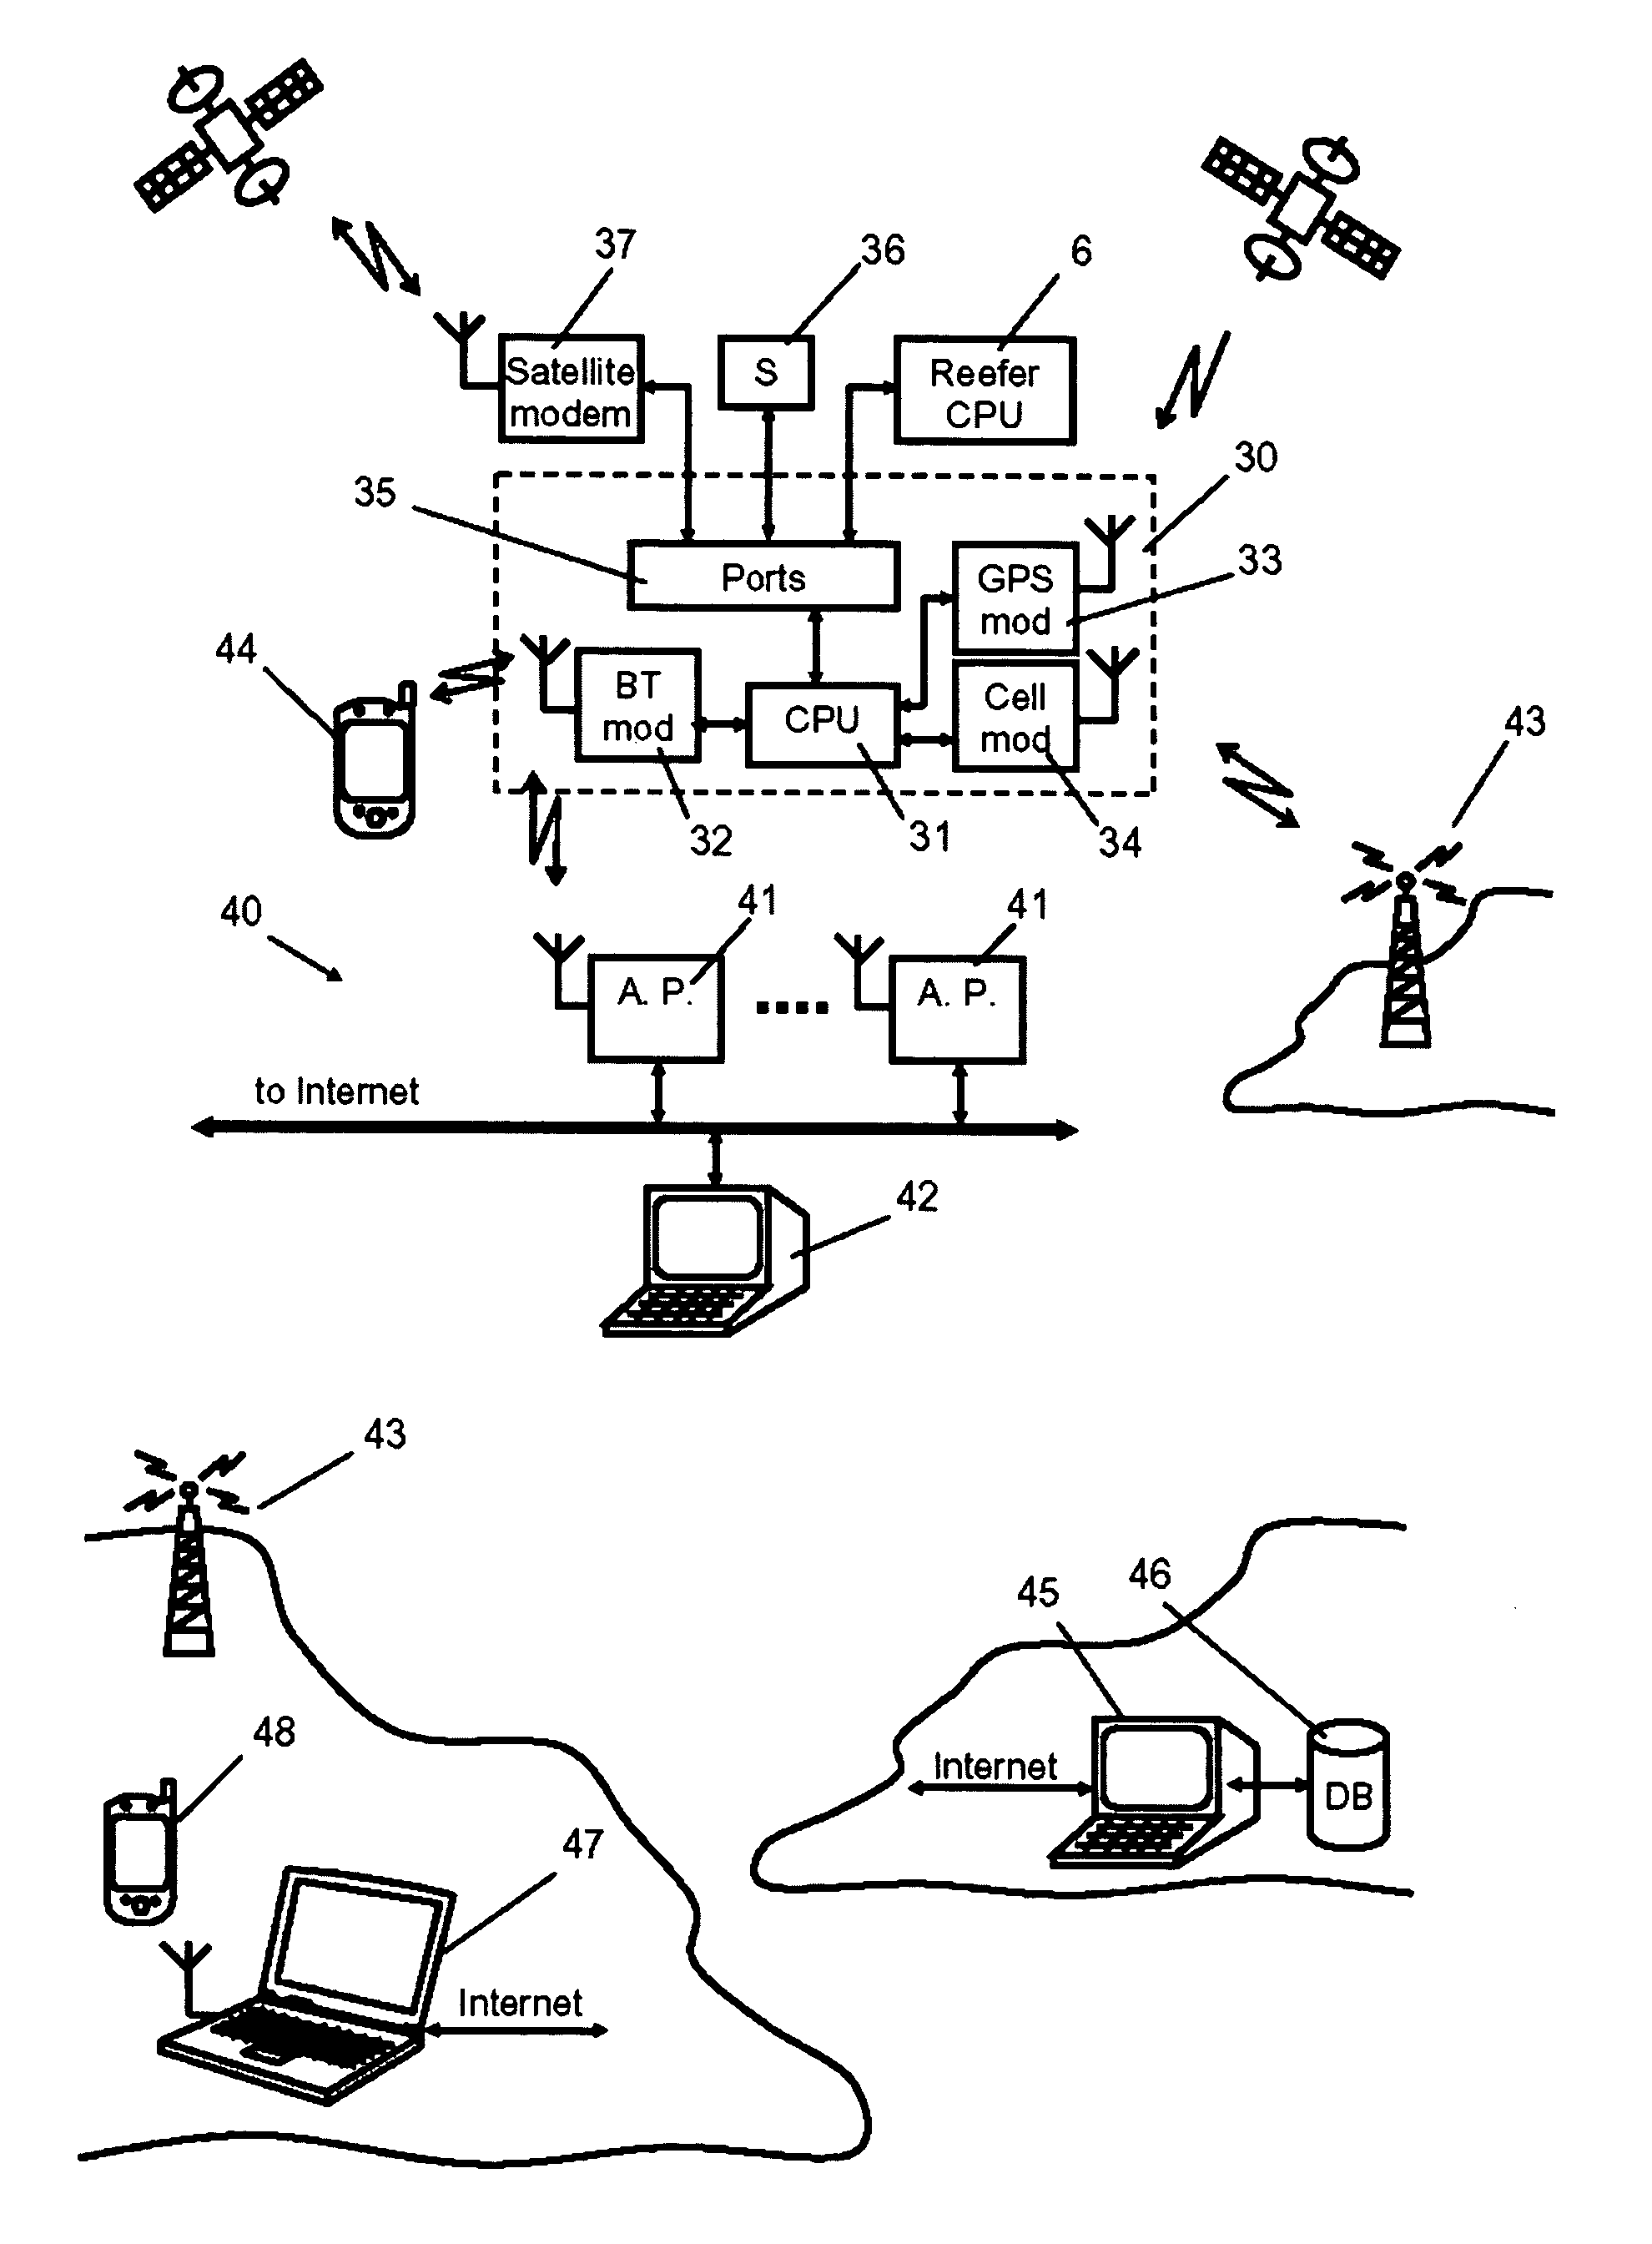 System for monitoring and control of transport containers